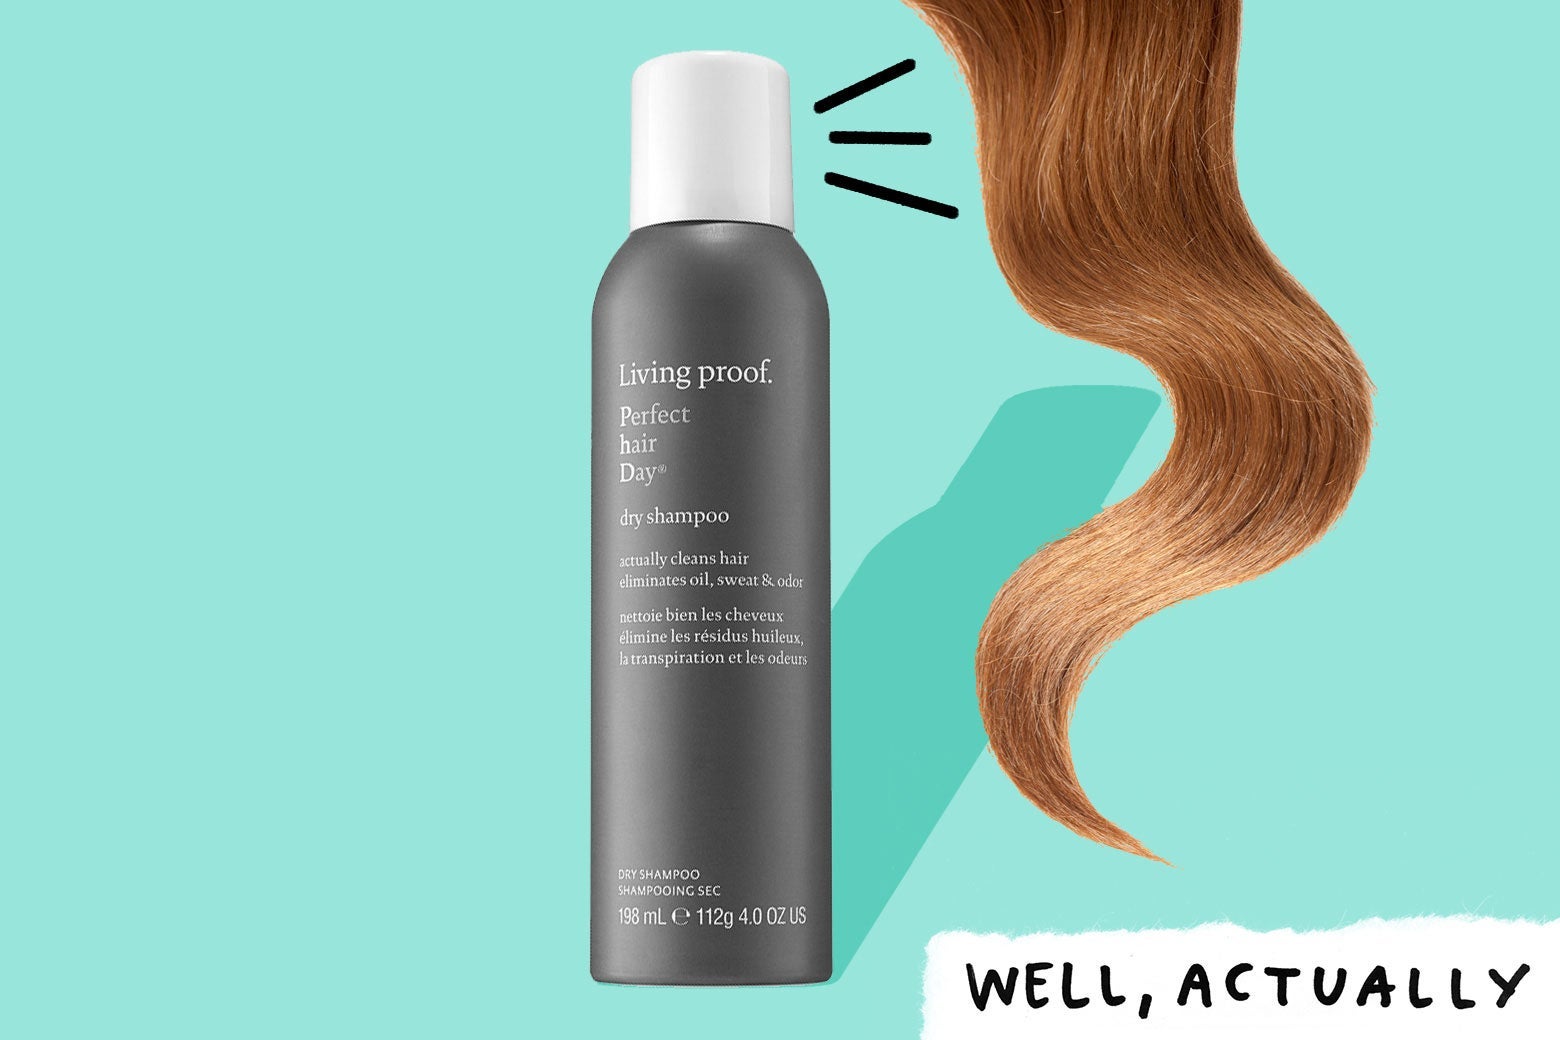 Photo illustration of the shampoo bottle, some long blond hair, and the Well Actually logo